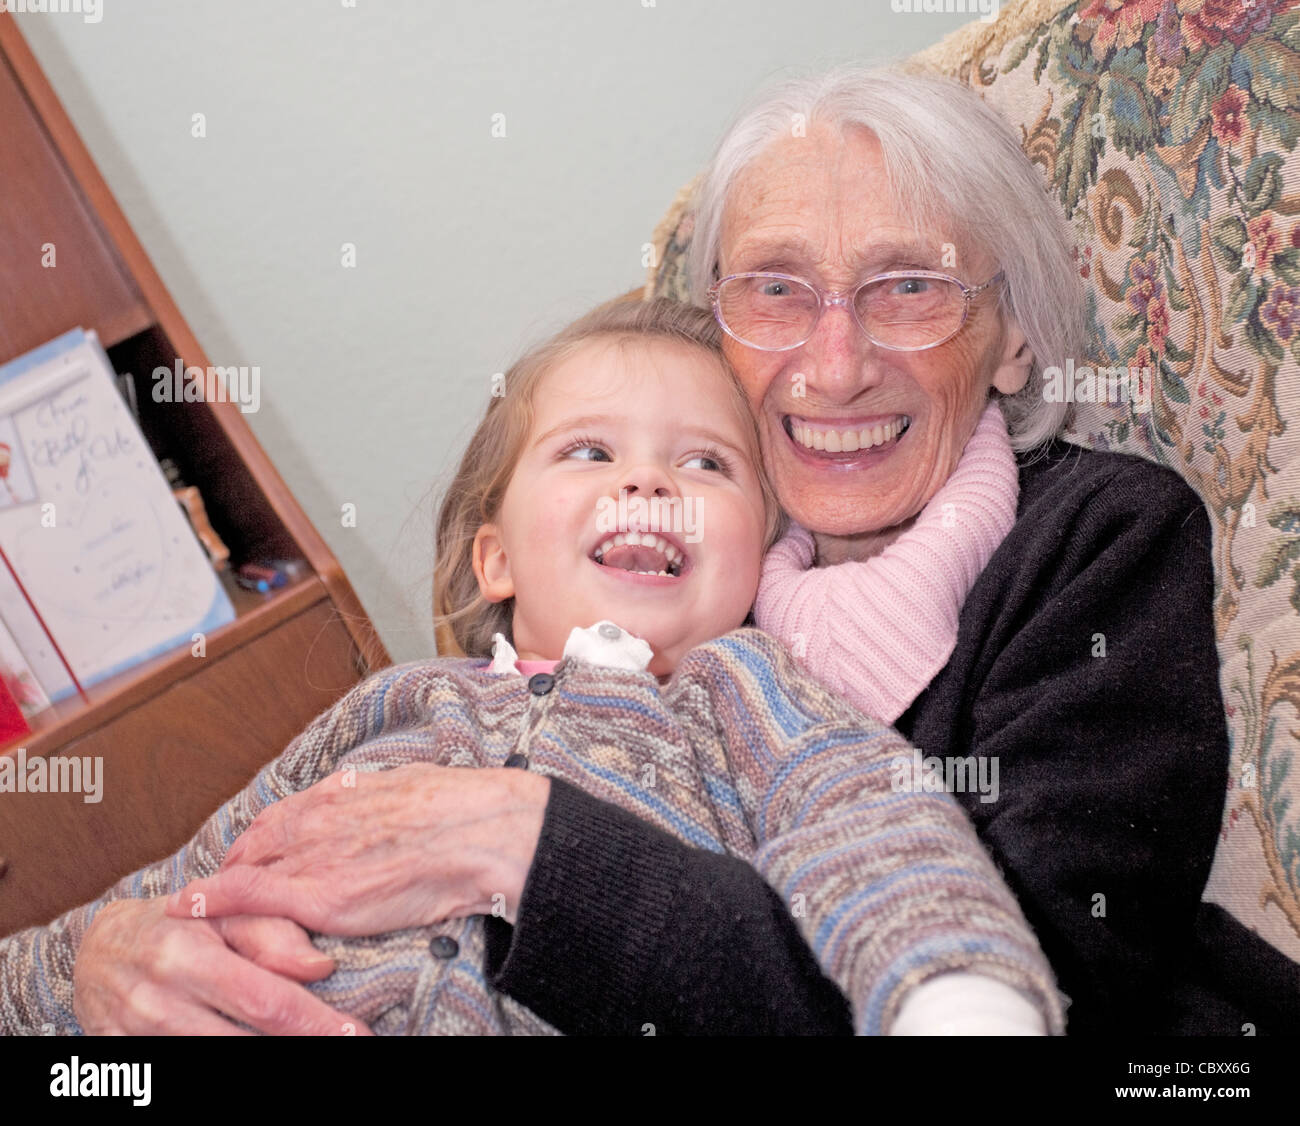 great grandmother sat having hugs with her great grand daughter Stock Photo